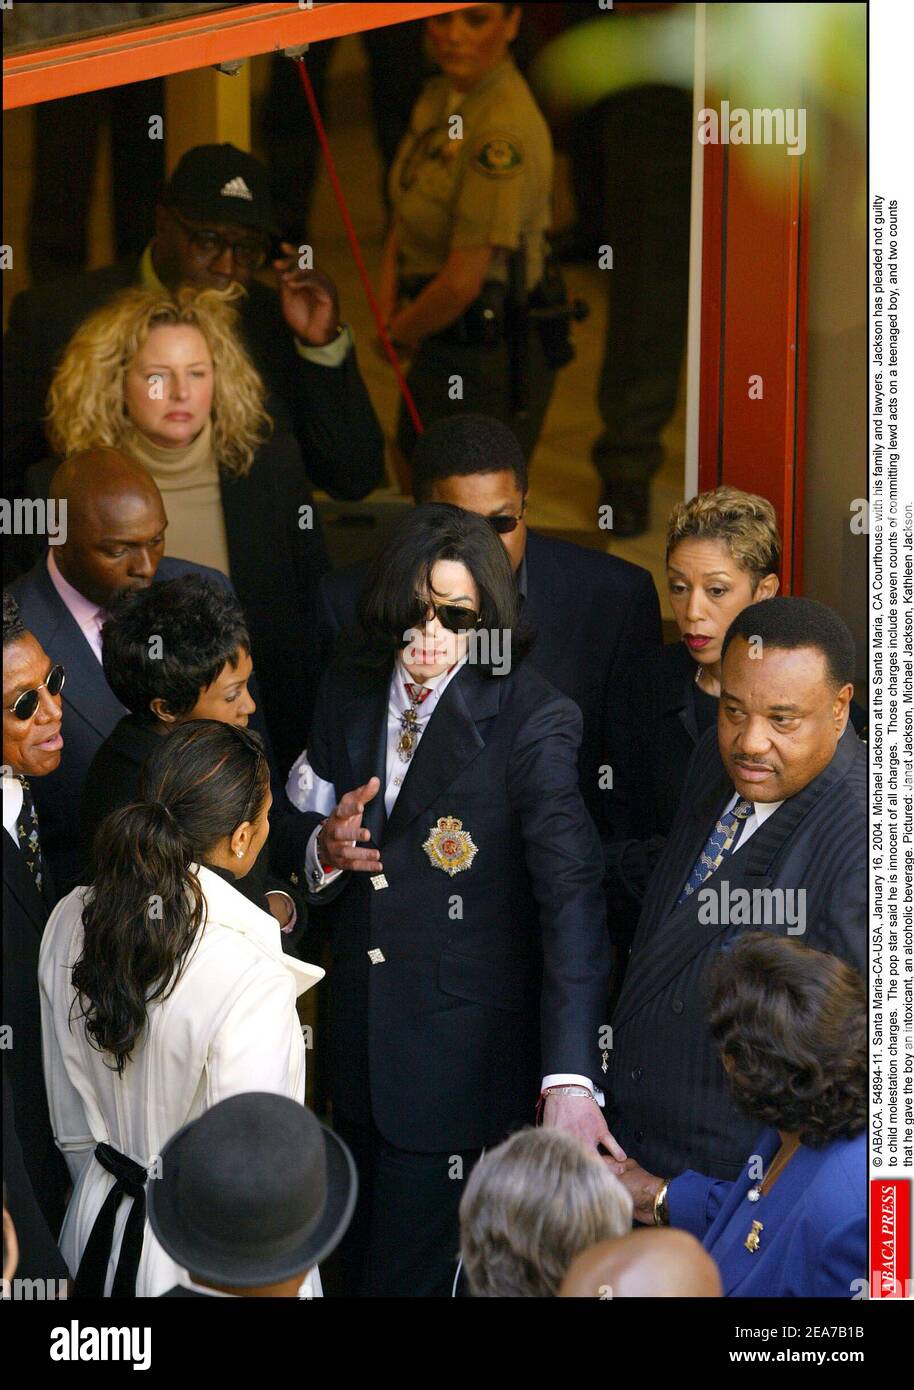 © ABACA. 54894-11. Santa Maria-CA-USA, January 16, 2004. Michael Jackson at the Santa Maria, CA Courthouse with his family and lawyers. Jackson has pleaded not guilty to child molestation charges. The pop star said he is innocent of all charges. Those charges include seven counts of committing lewd acts on a teenaged boy, and two counts that he gave the boy an intoxicant, an alcoholic beverage. Pictured: Janet Jackson, Michael Jackson, Kathleen Jackson. Stock Photo